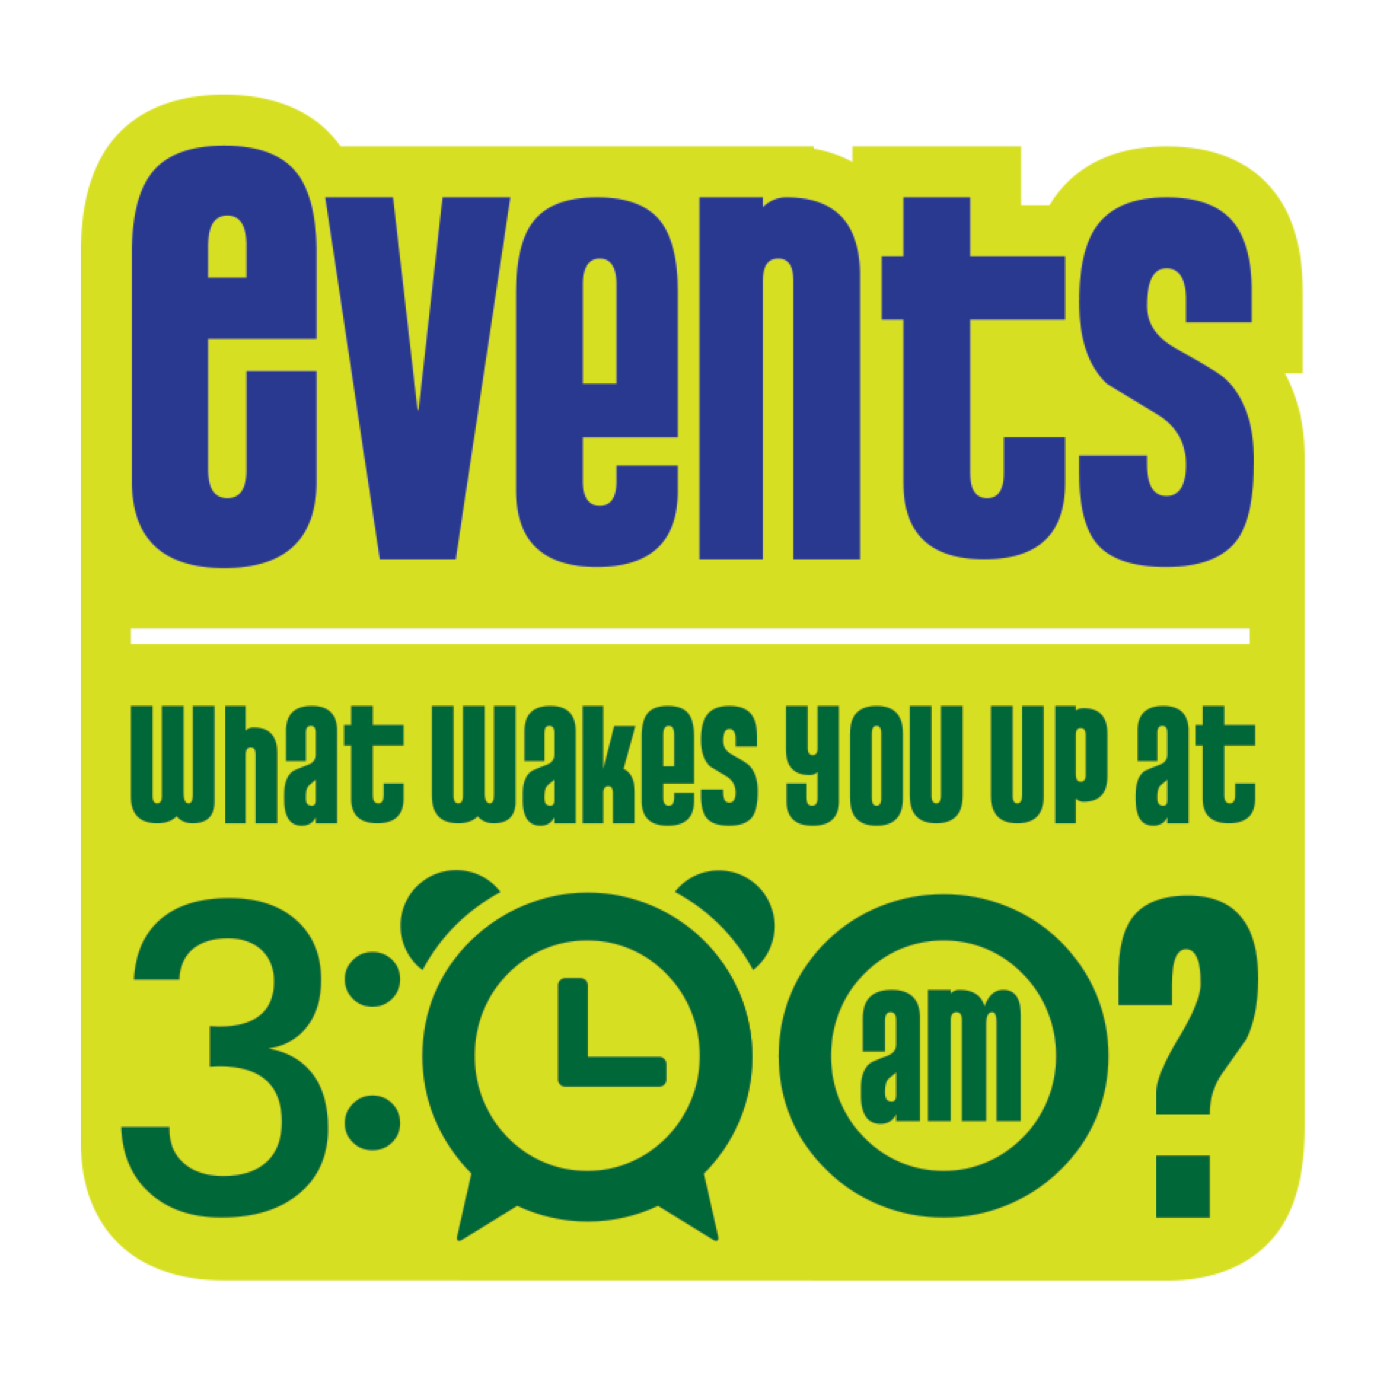 Events: What Wakes You Up at 3:00 am?